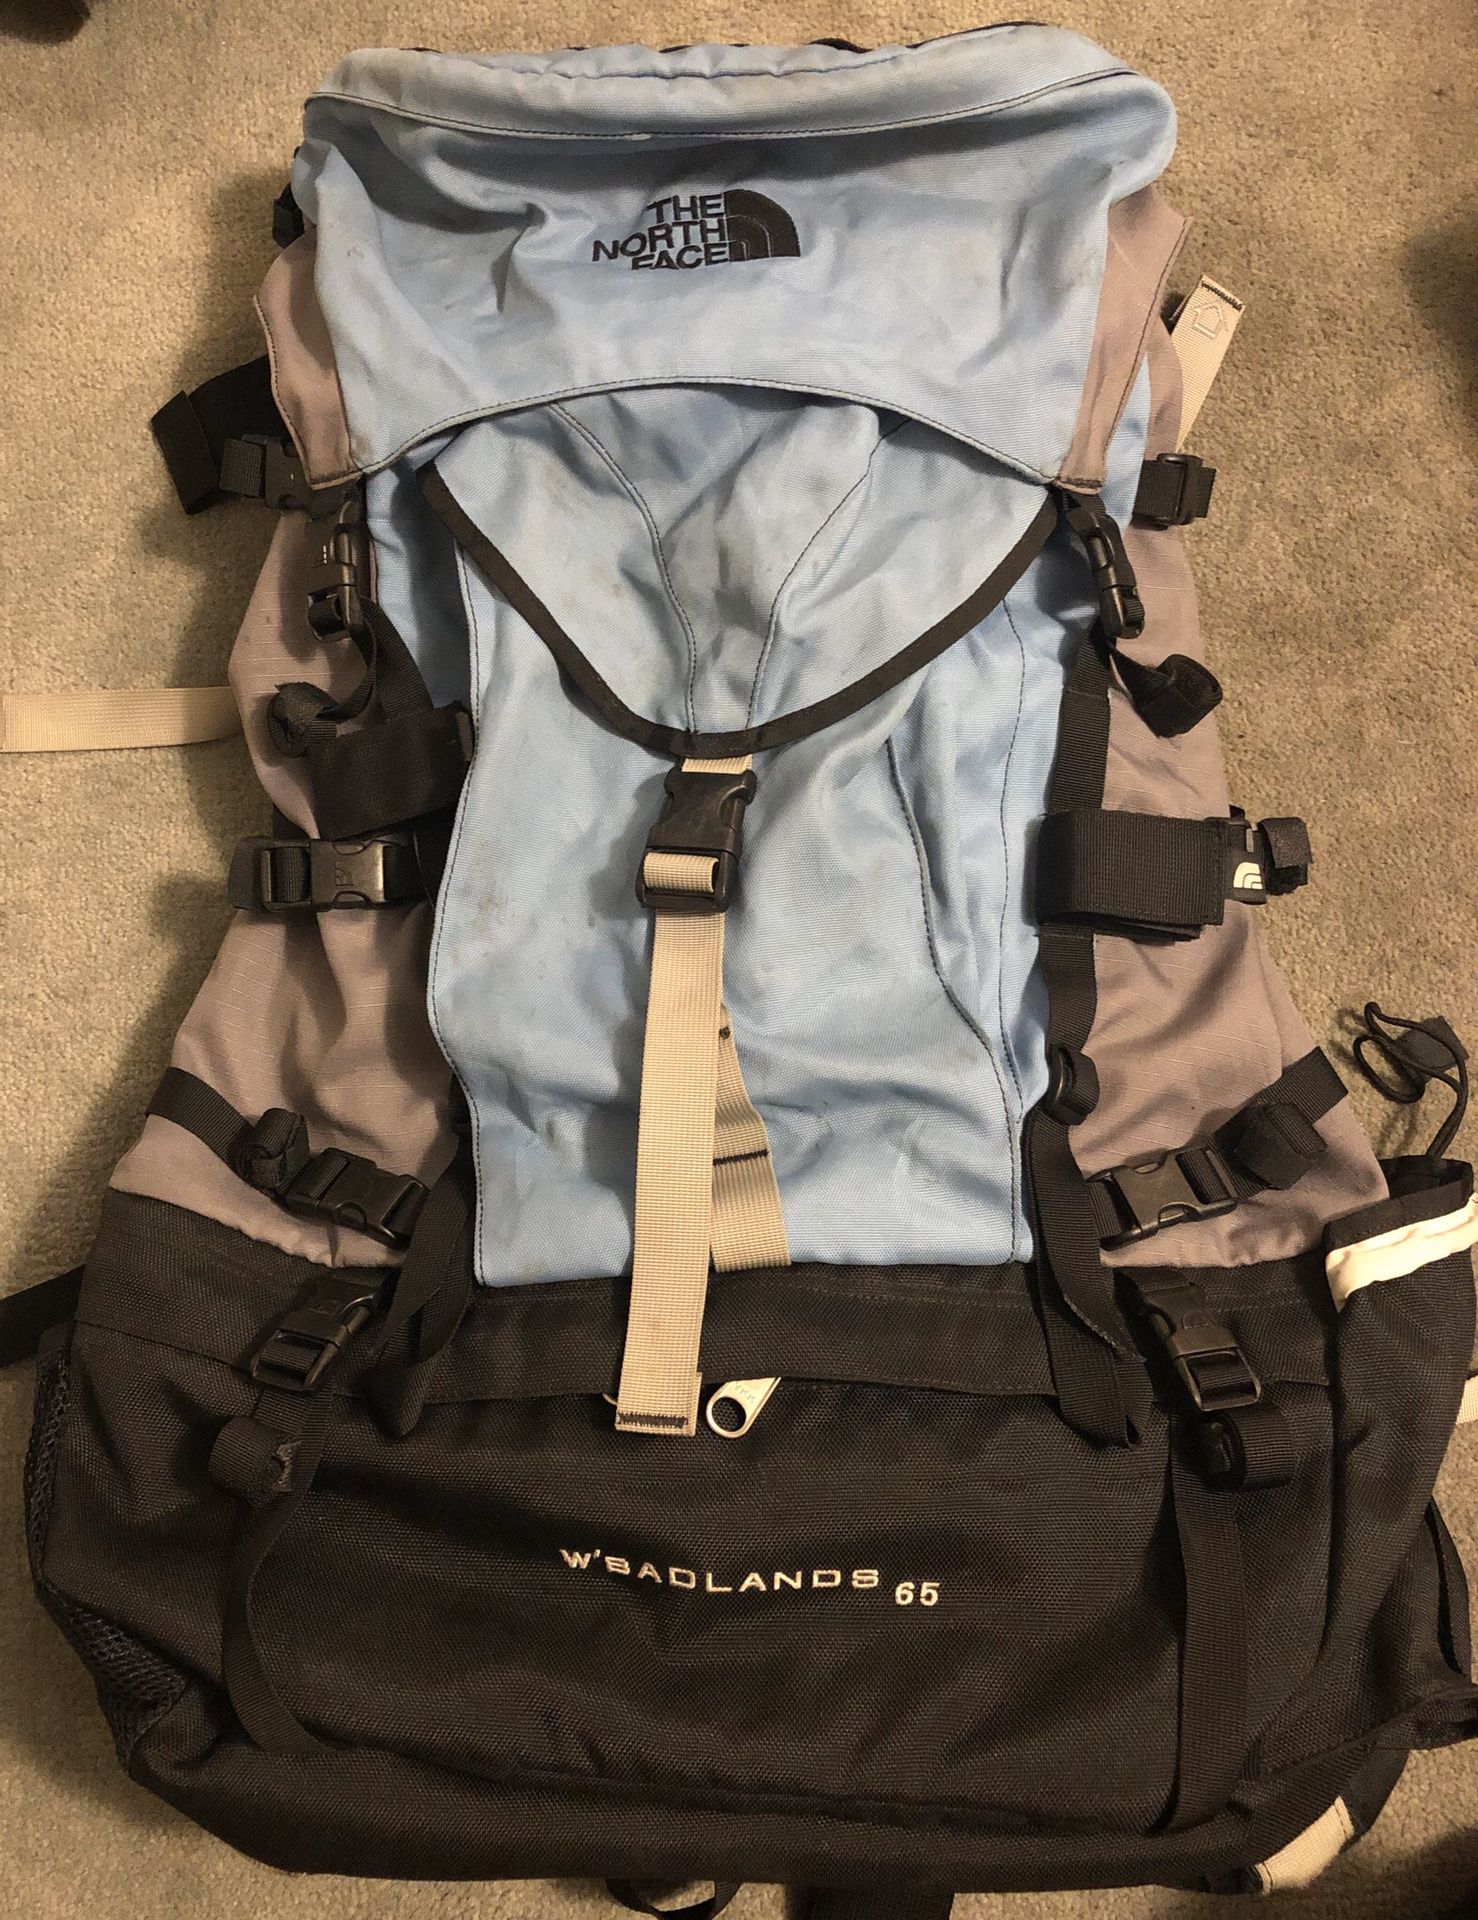 The North Face Women’s Badlands 65 Hiking Backpack